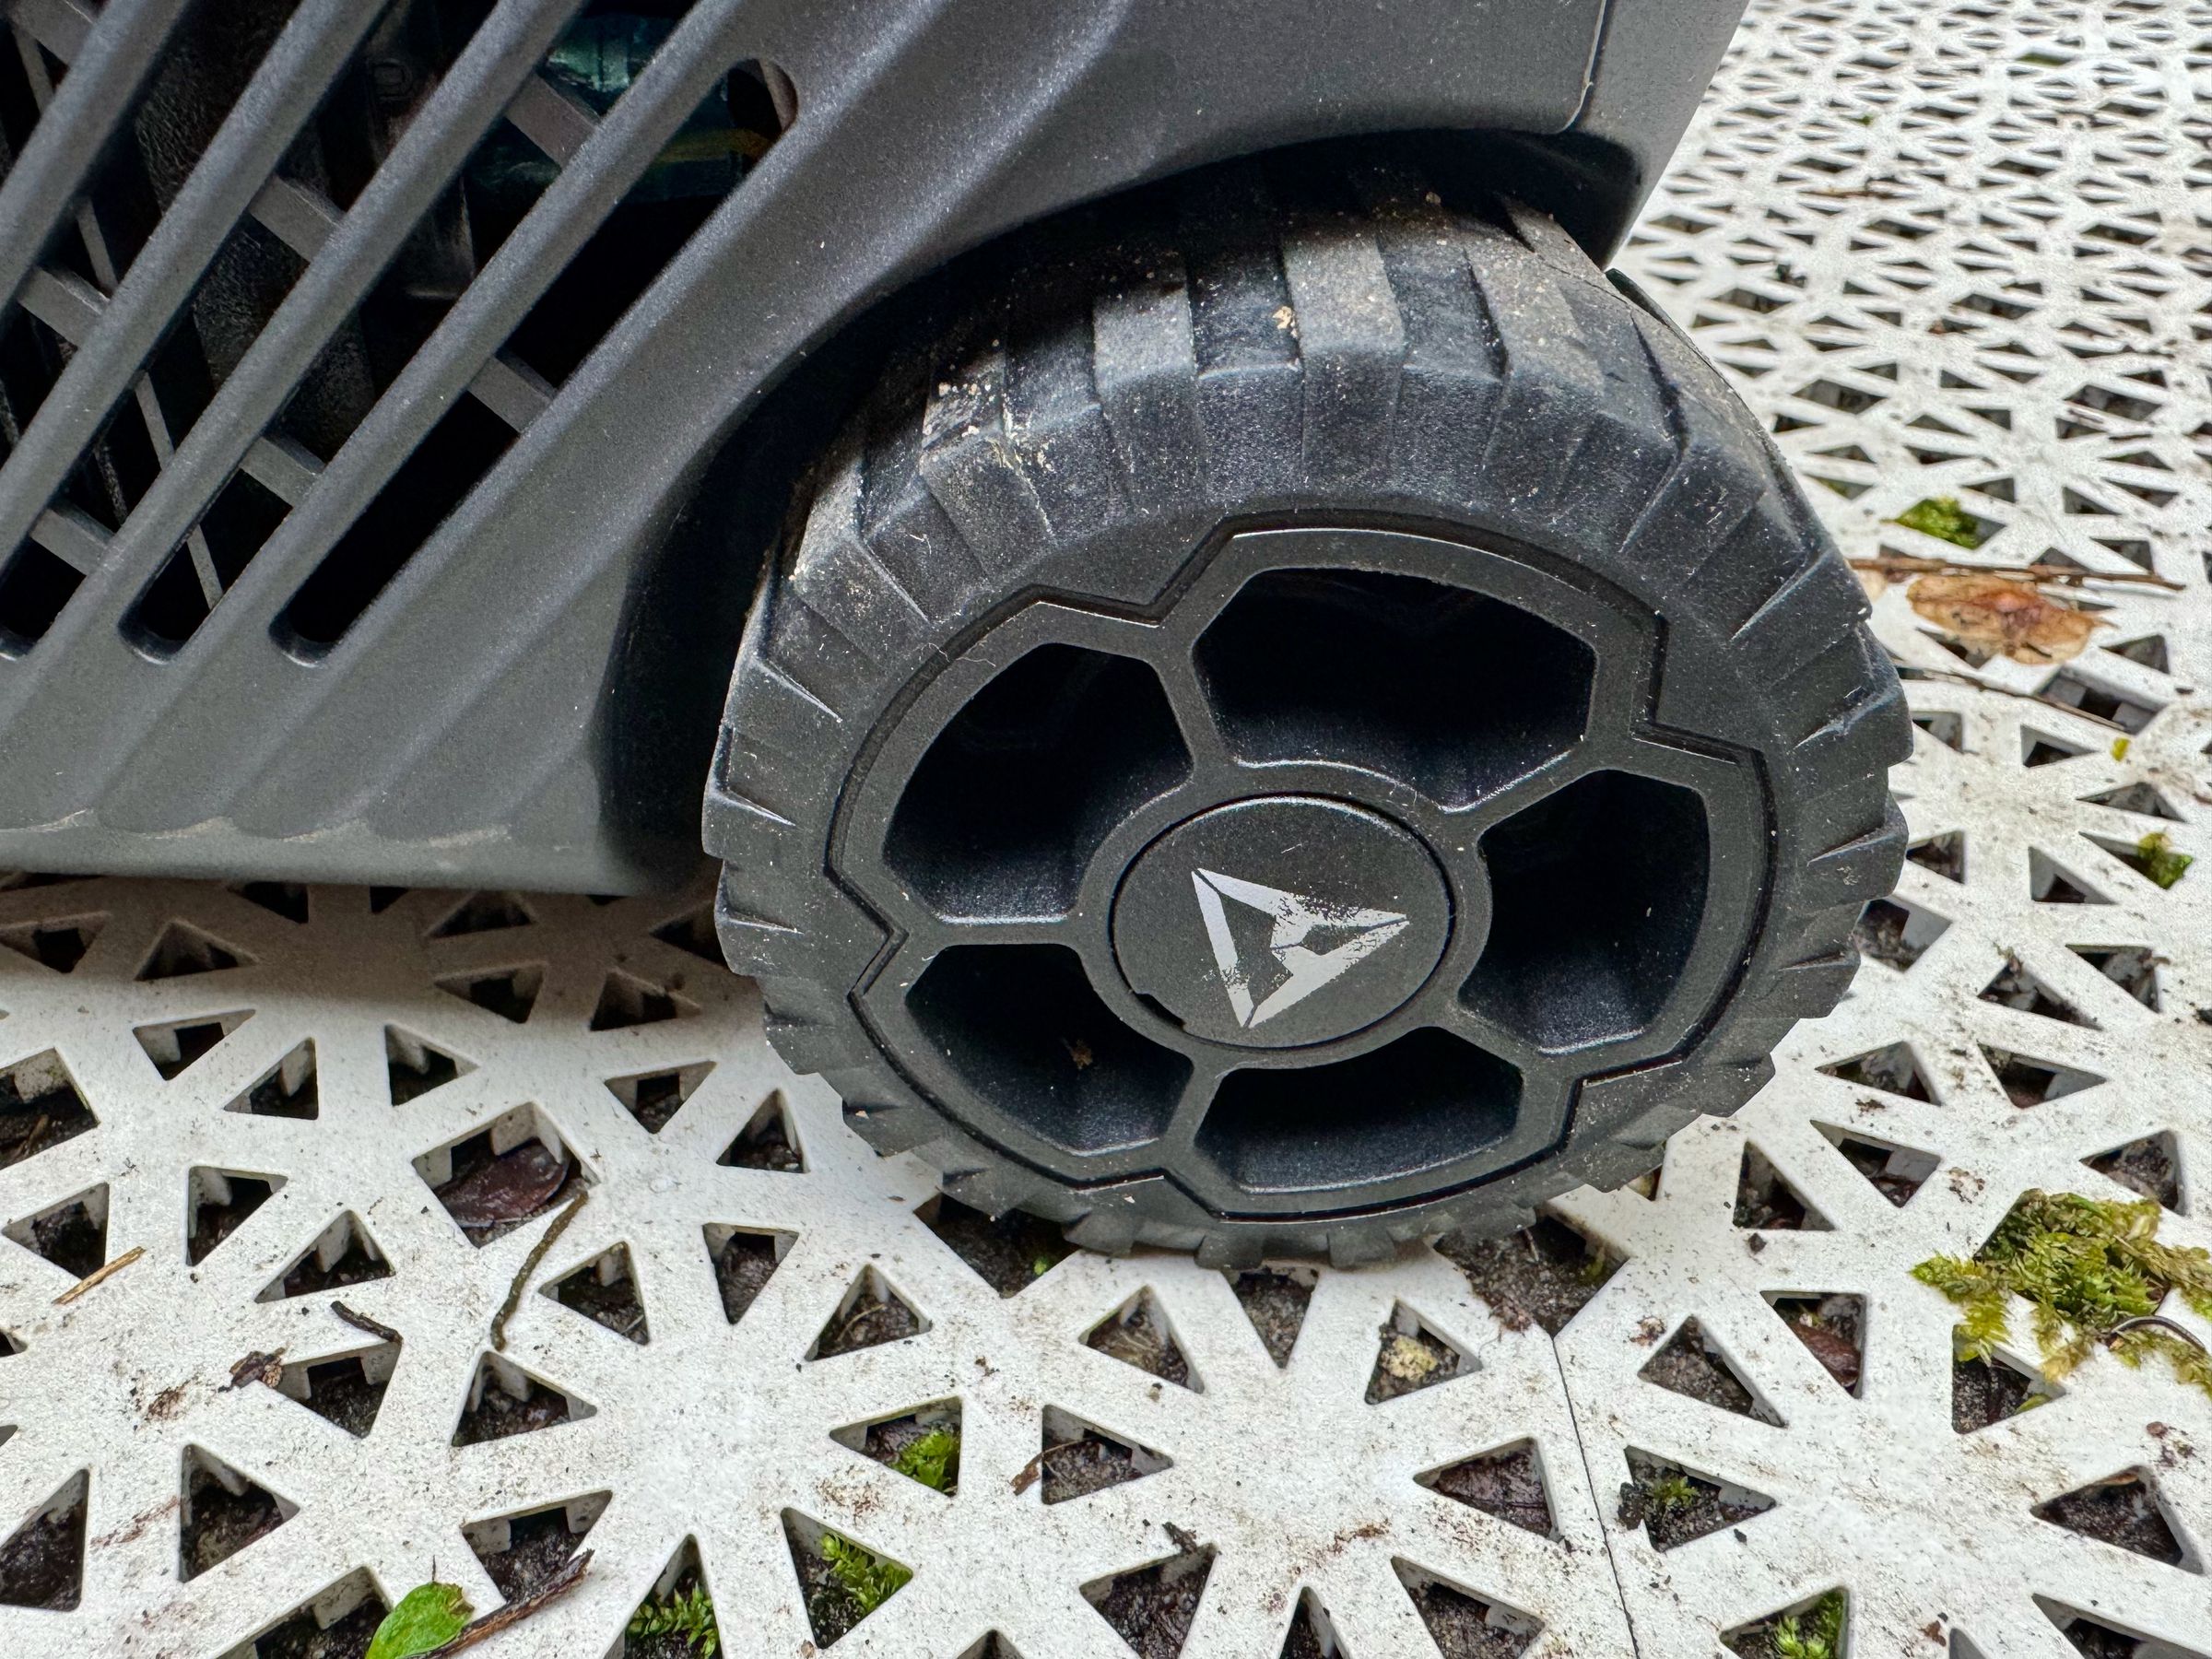 <em>There’s not much ground clearance, so the base drags on uneven surfaces.</em>